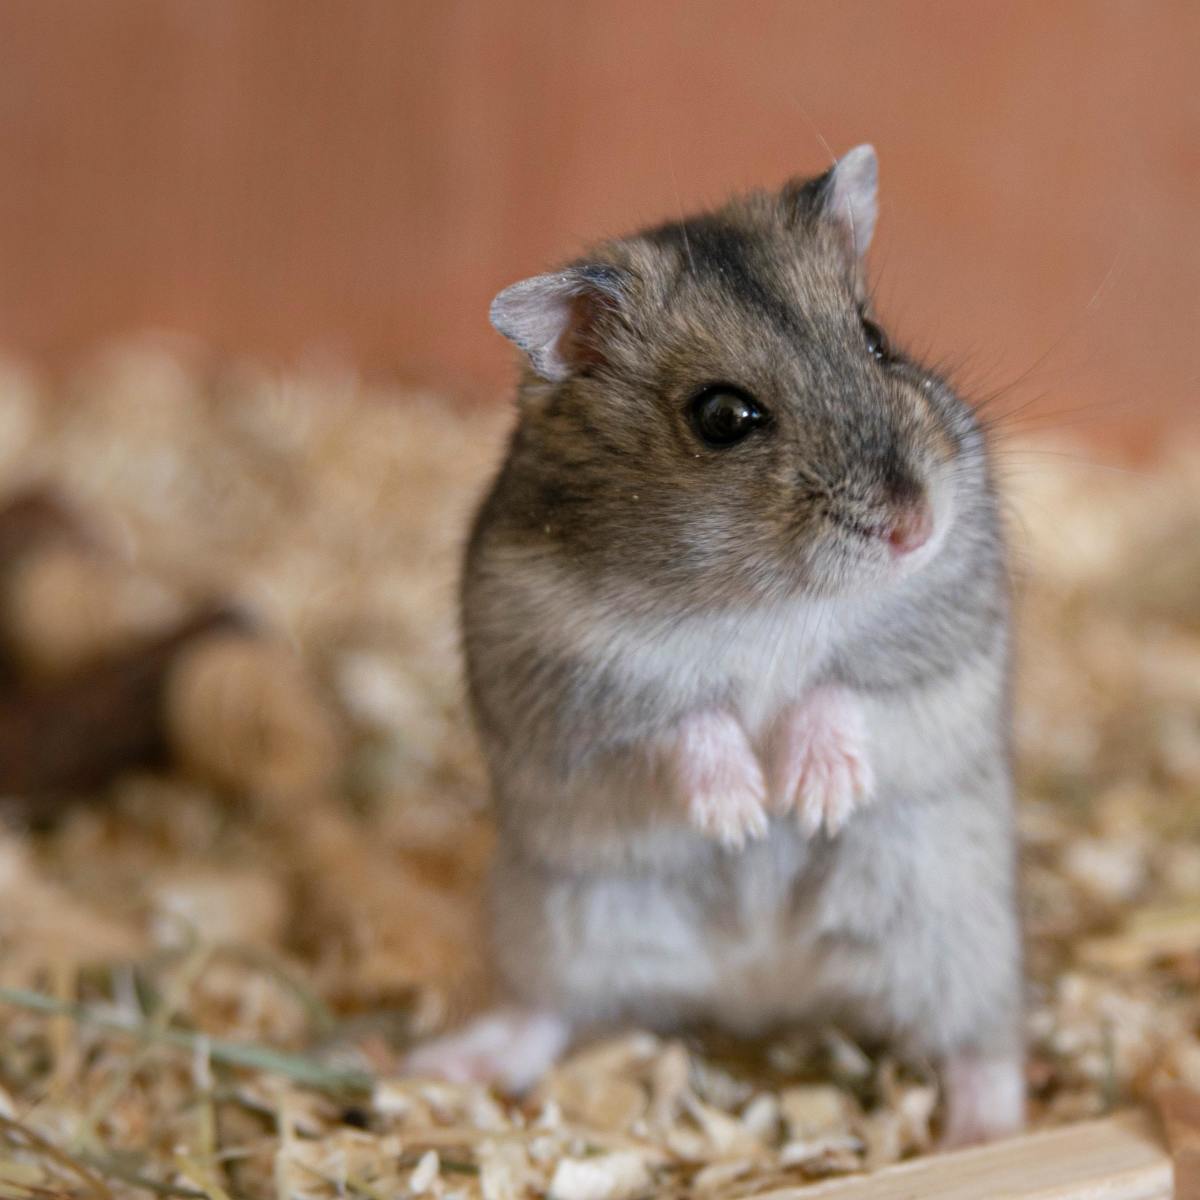 Q&A: Can I Give Ringworm Pills to My Hamster?